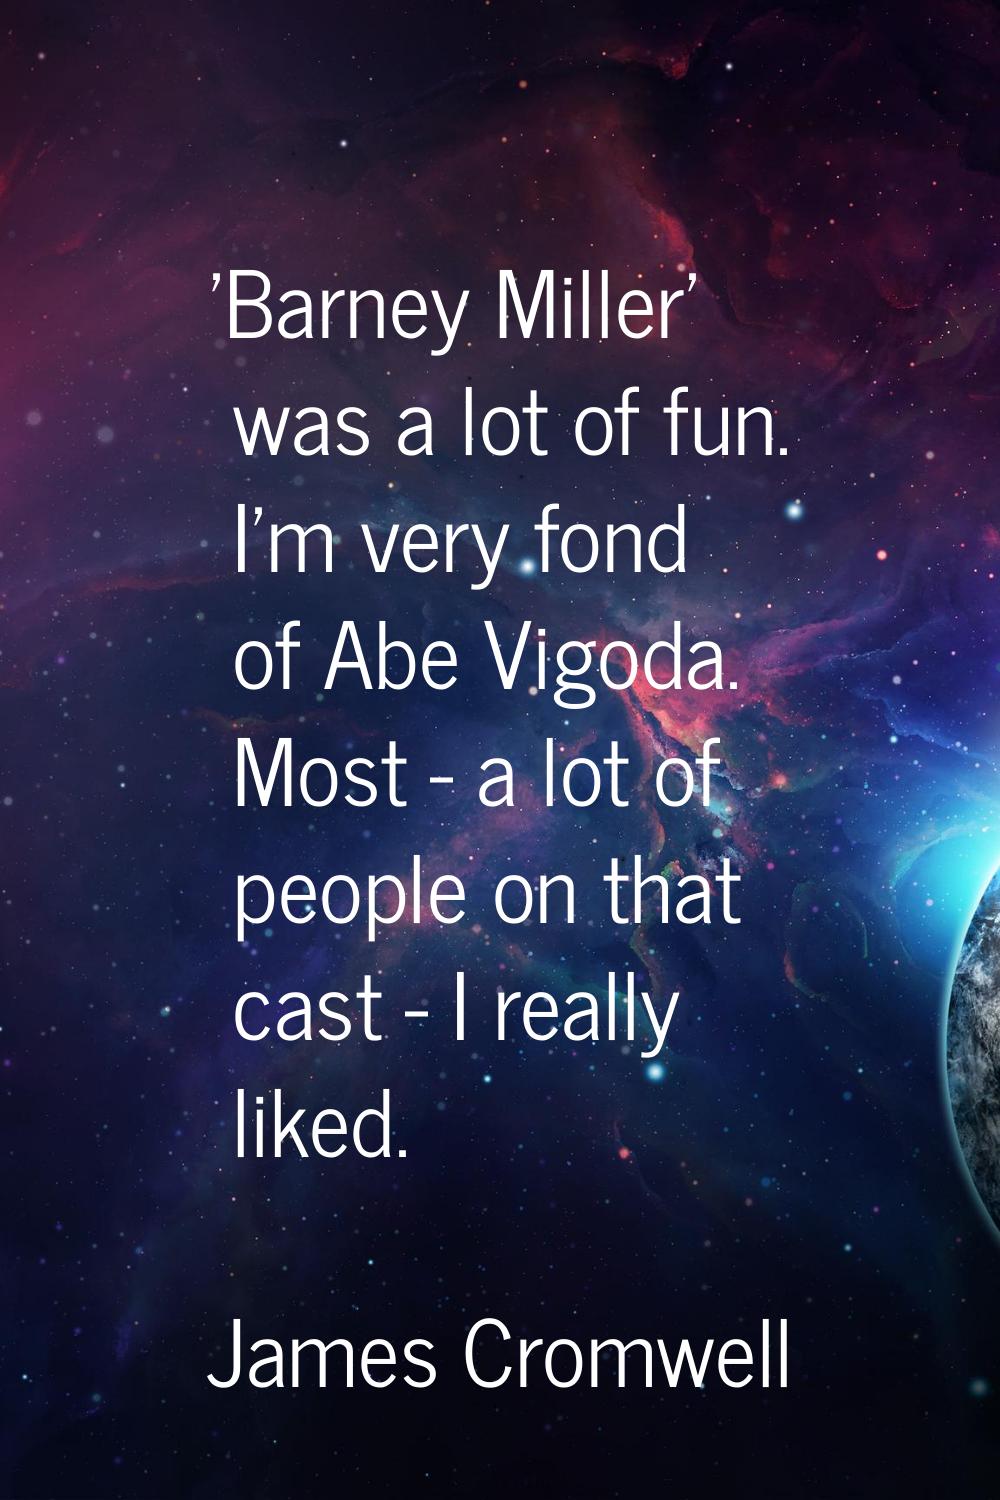 'Barney Miller' was a lot of fun. I'm very fond of Abe Vigoda. Most - a lot of people on that cast 